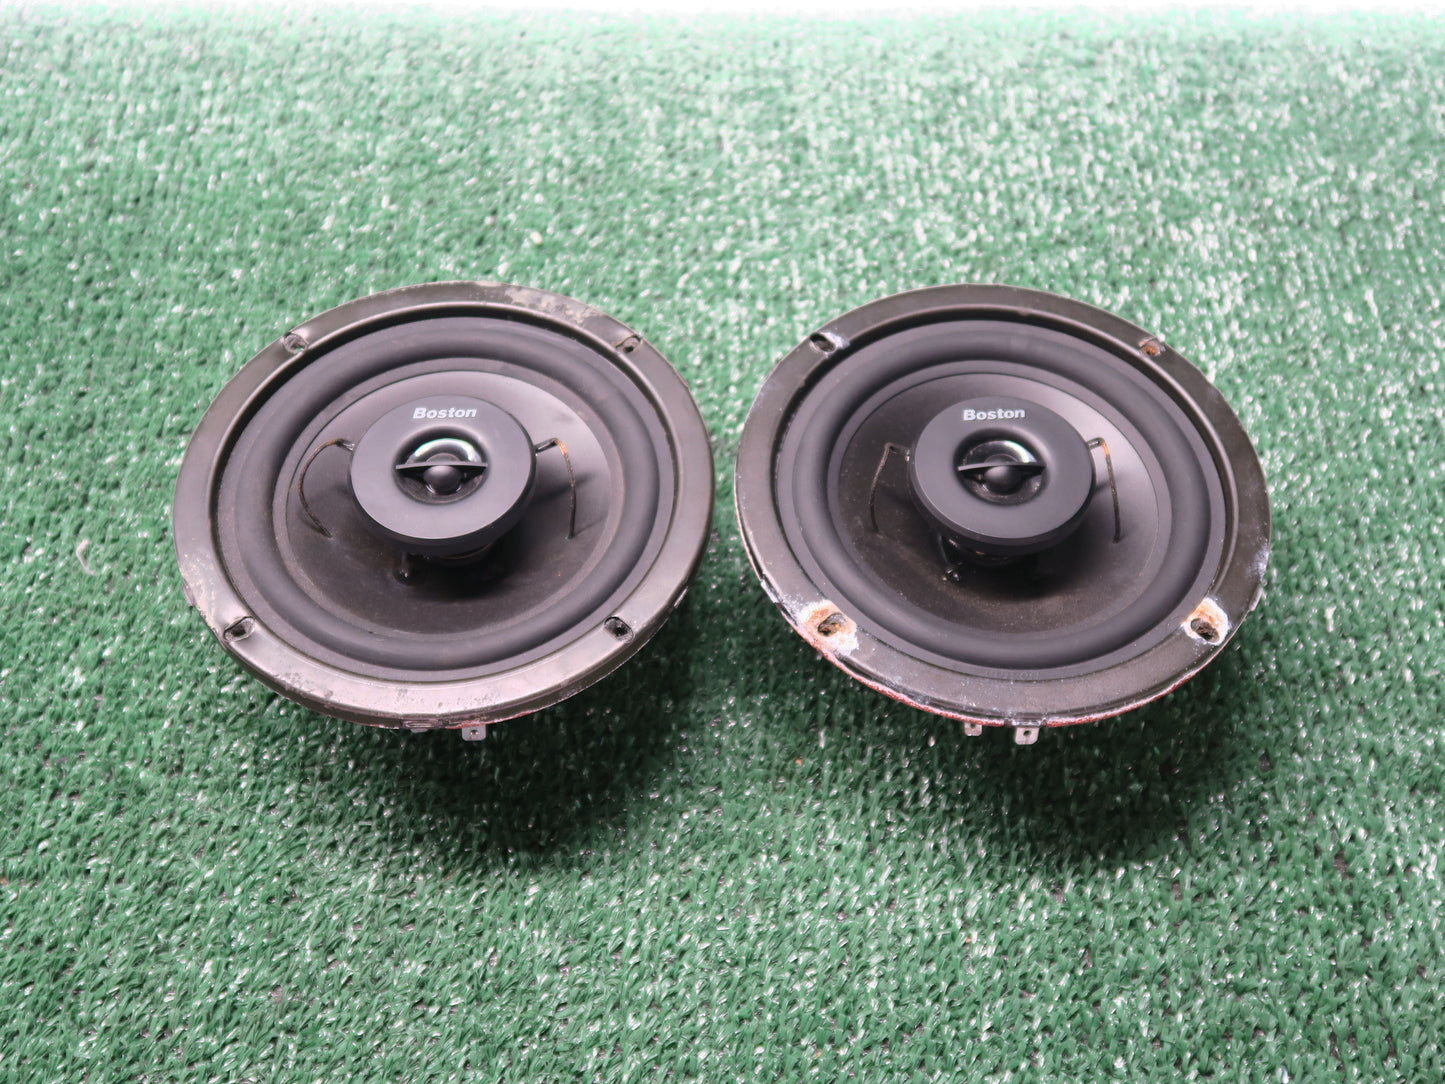 Boston RX57 2-Way Coaxial Car Speakers Made in USA Set of 2 Tested